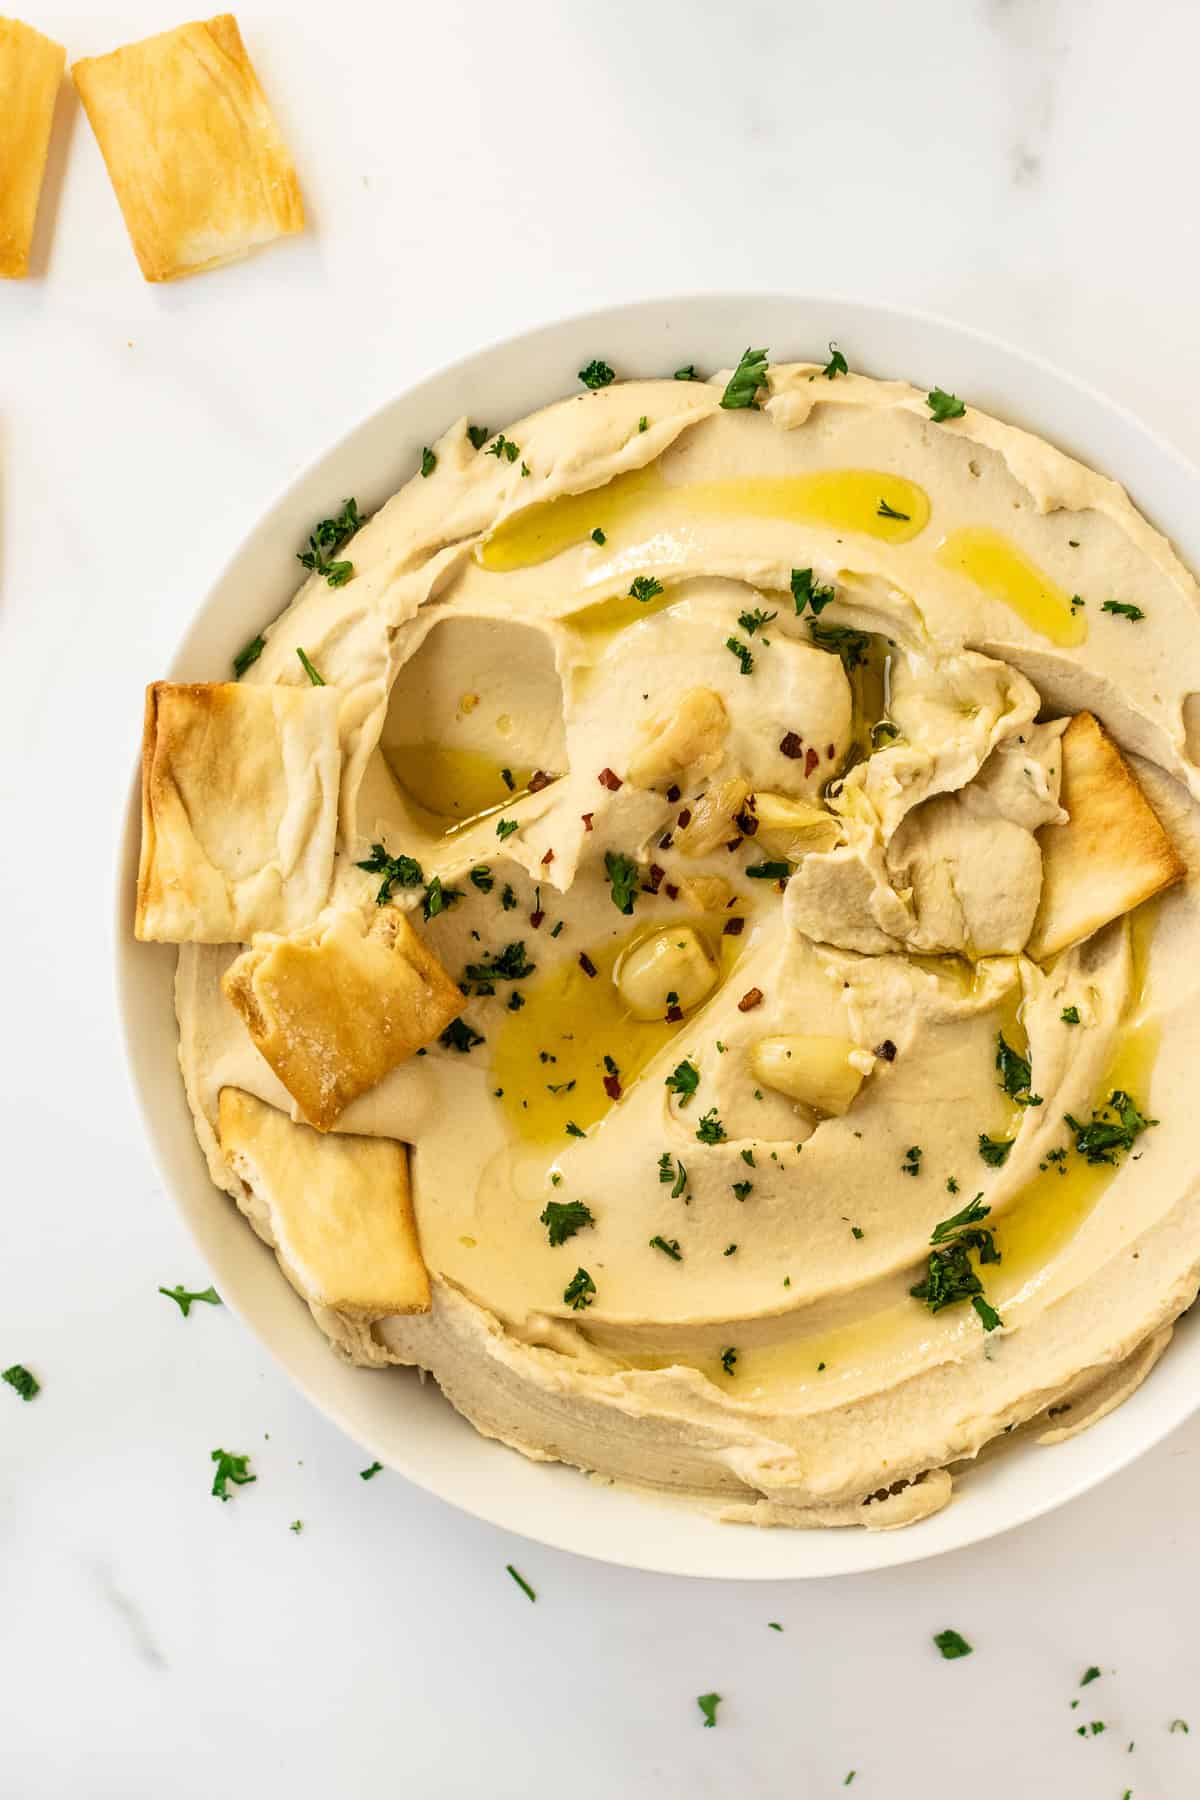 hummus recipe in a white bowl topped with parsley, olive oil and pita chips.